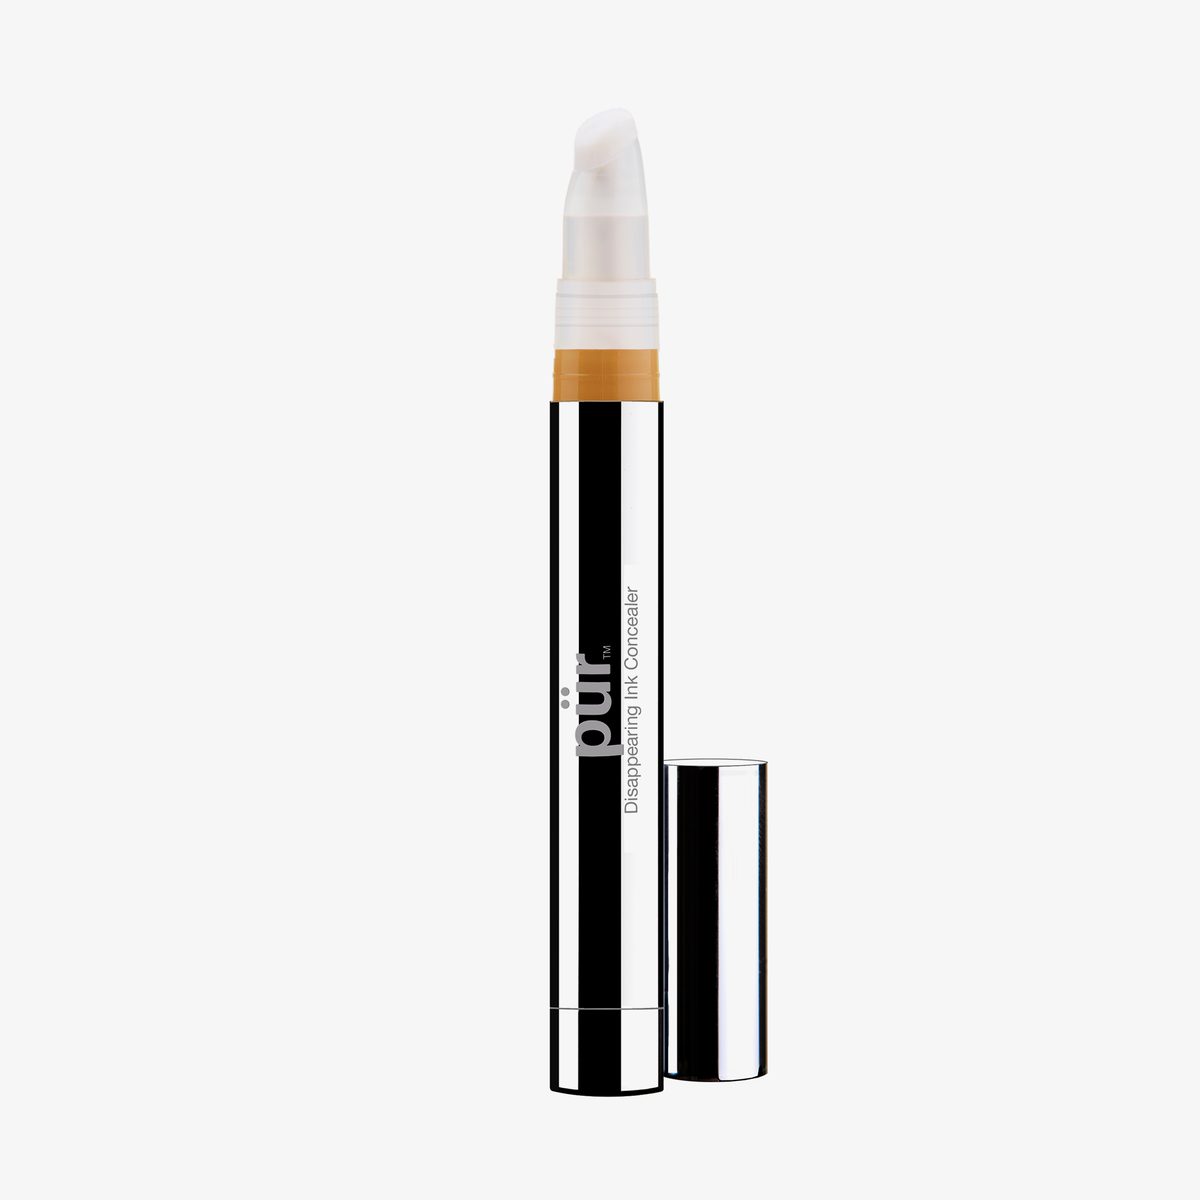 Pür Cosmetics | Disappearing Ink Concealer Light Tan